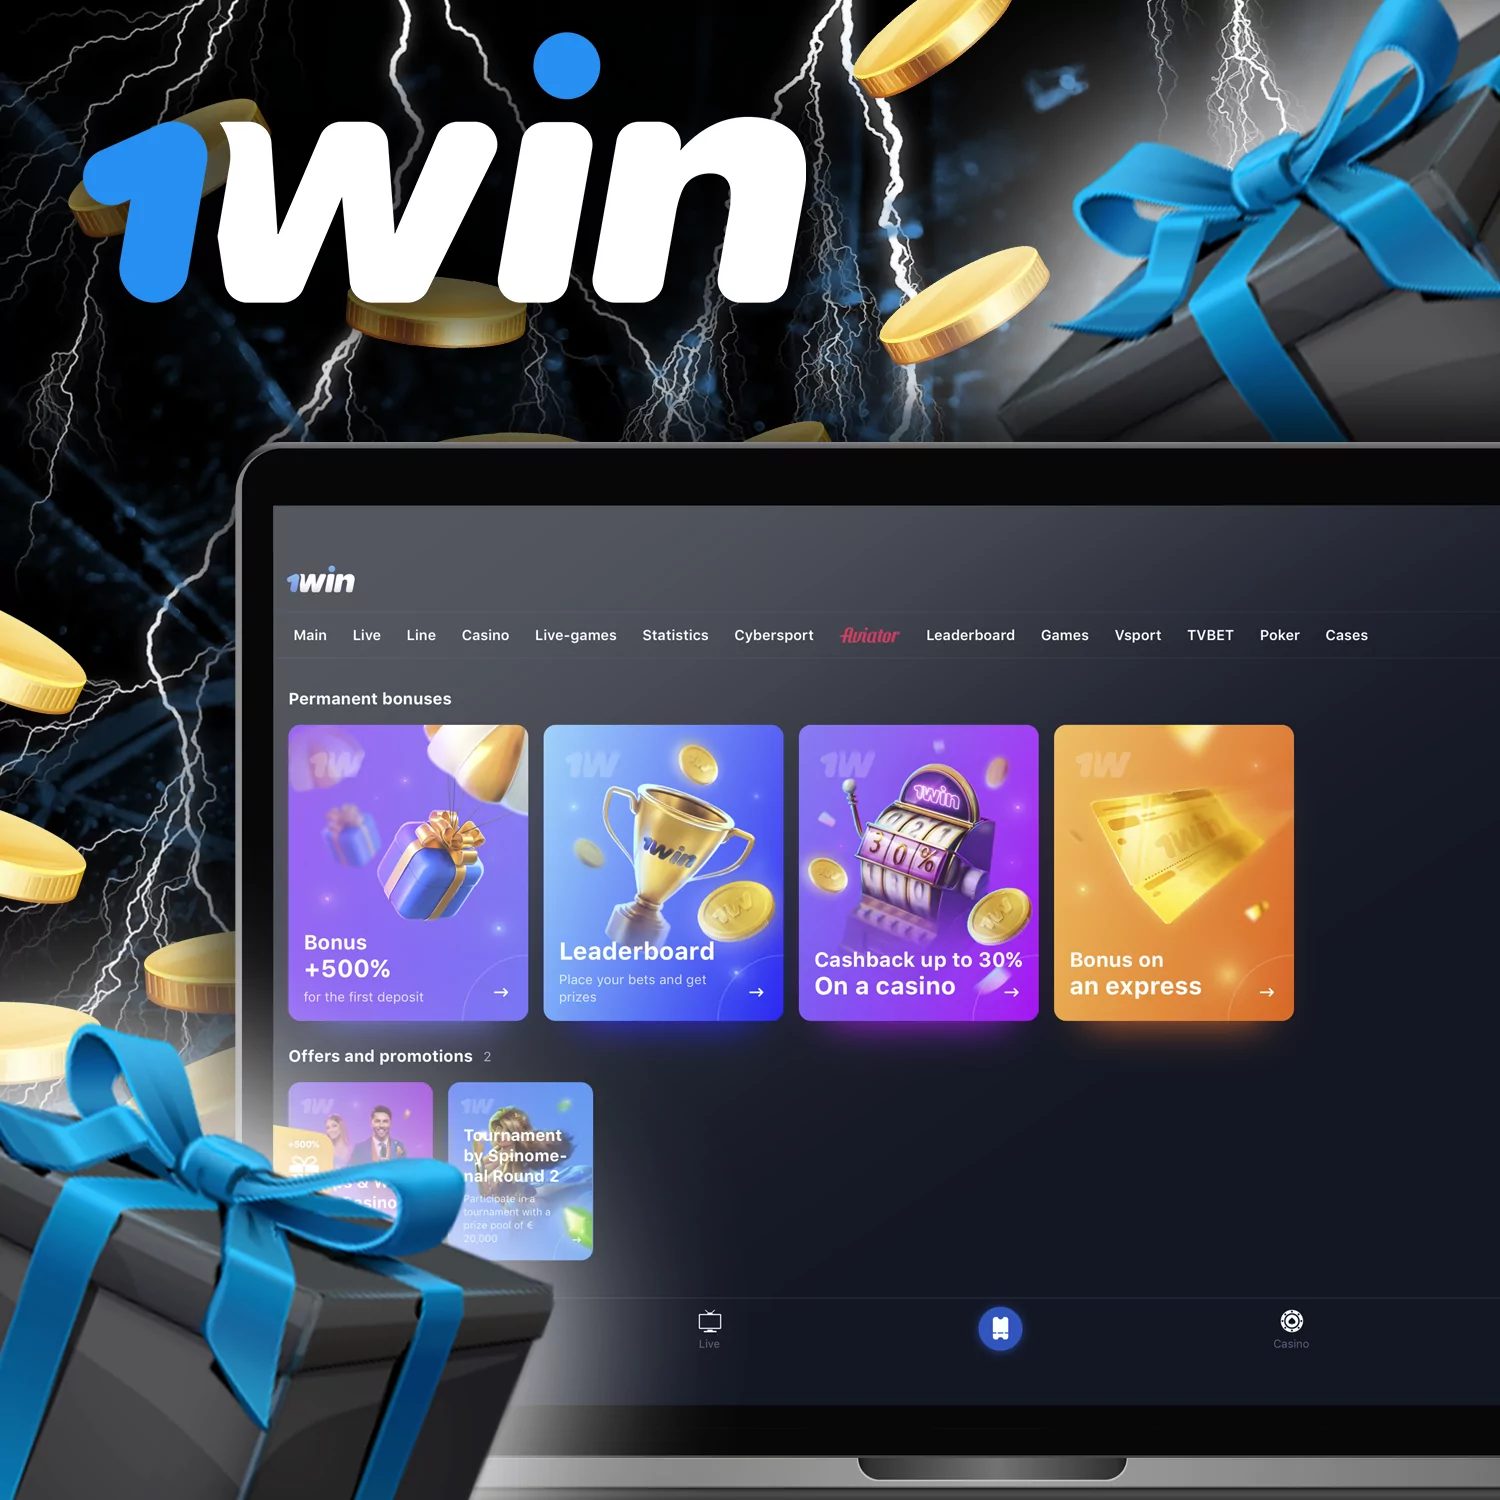 1win offers a variety of bonuses and promotions for sports betting.